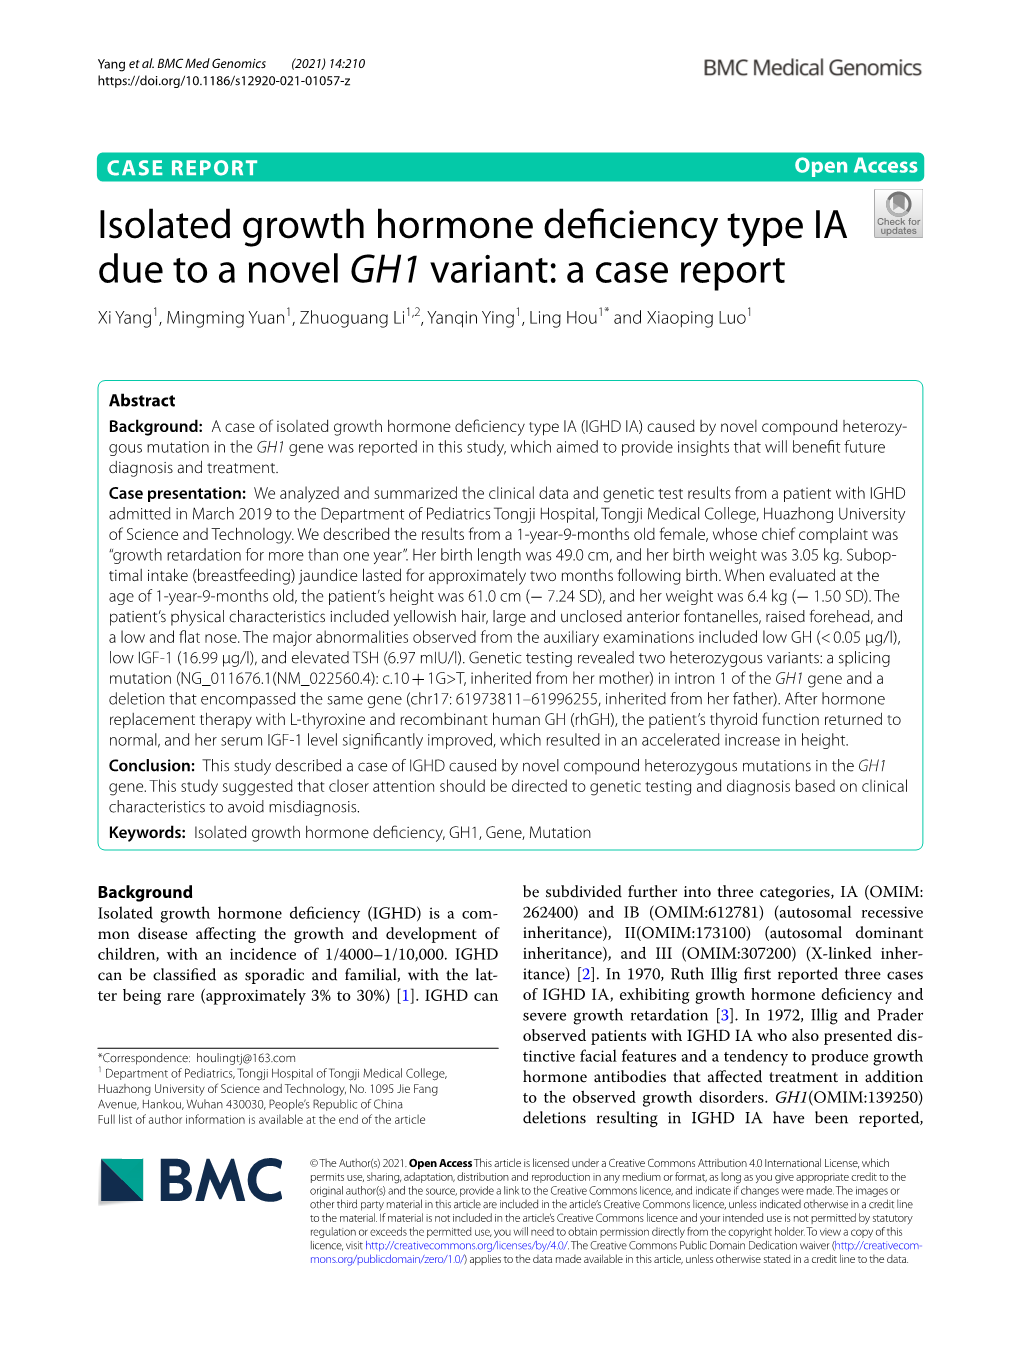 Isolated Growth Hormone Deficiency Type IA Due to a Novel